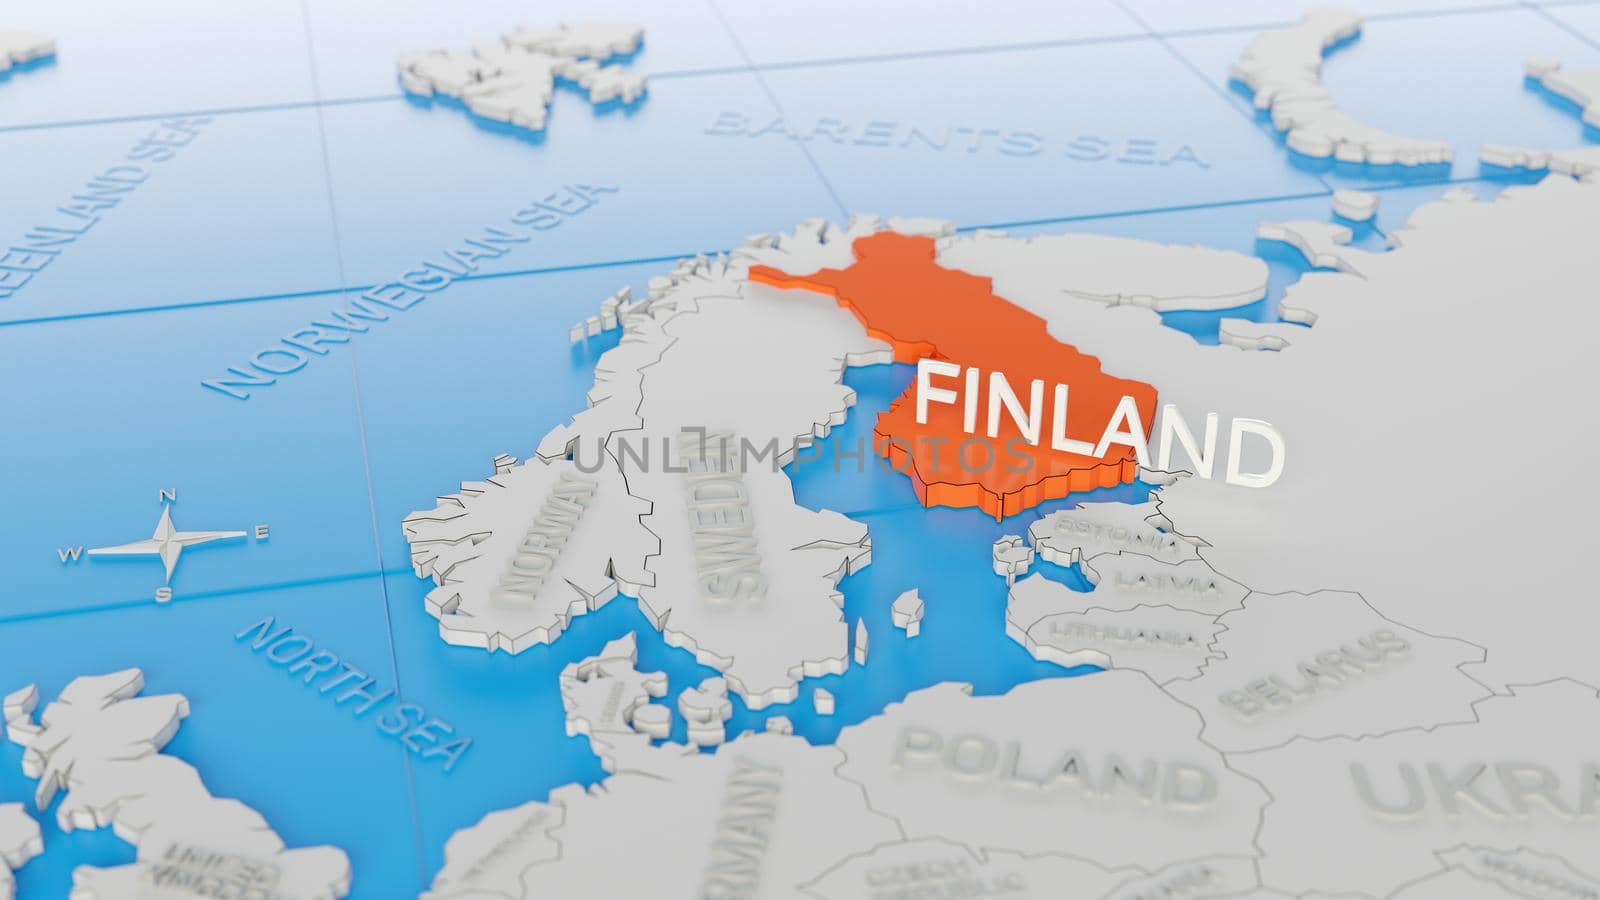 Finland highlighted on a white simplified 3D world map. Digital 3D render.